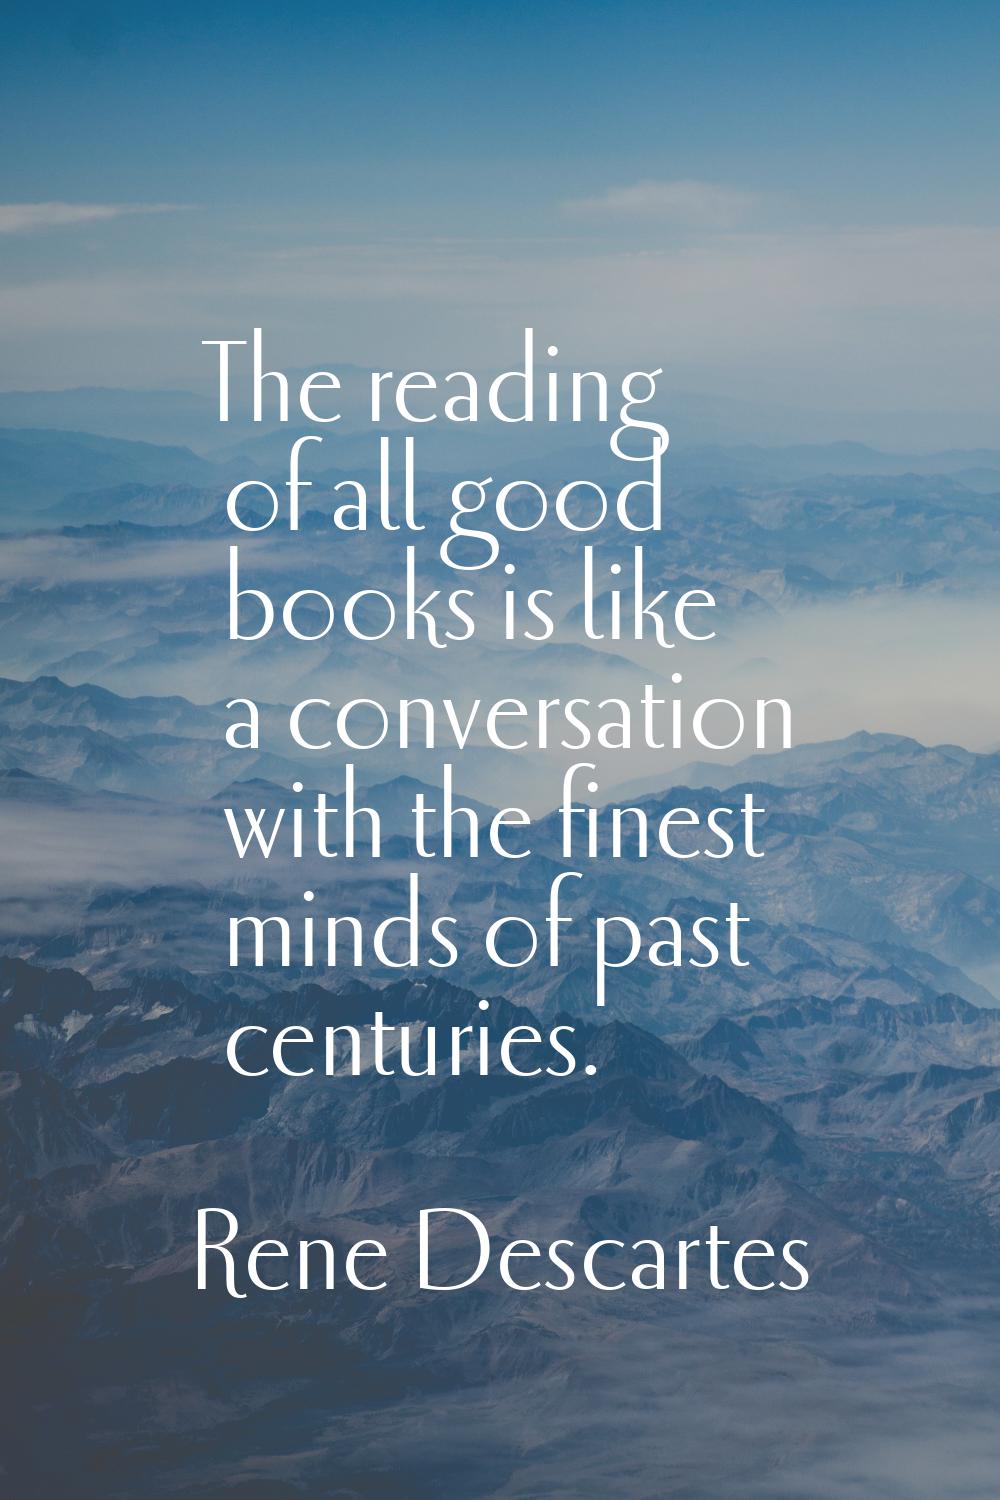 The reading of all good books is like a conversation with the finest minds of past centuries.